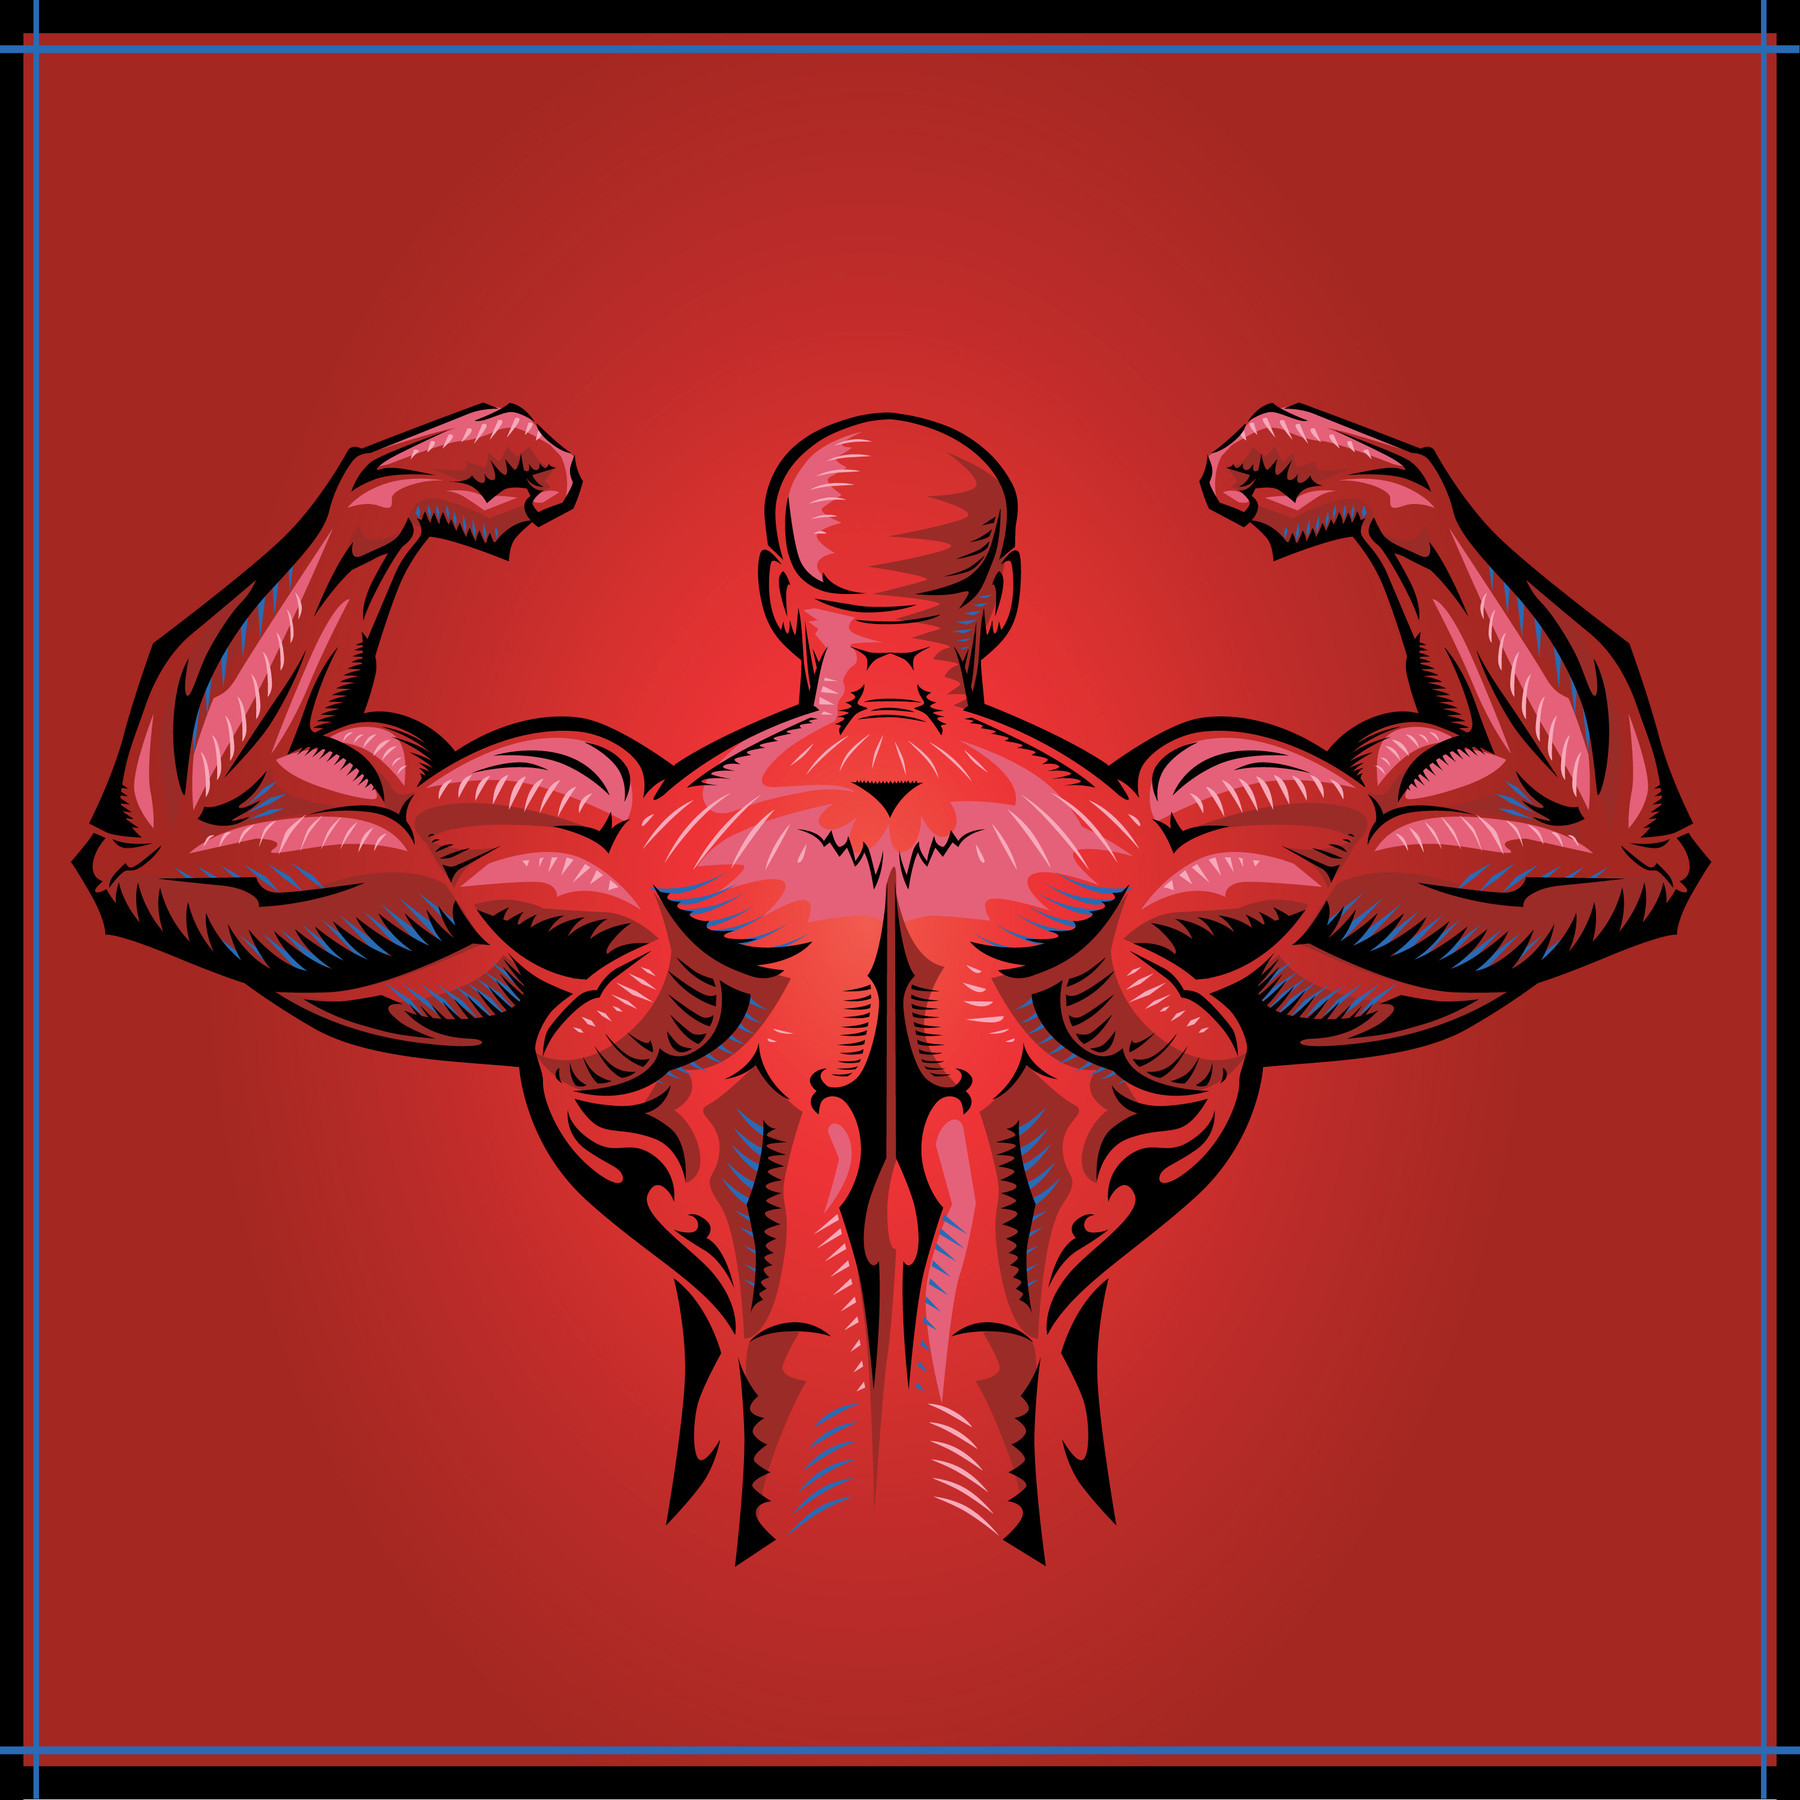 Bodybuilder Ideal Physique Poses Showing Off Stock Photo 2006307845 |  Shutterstock